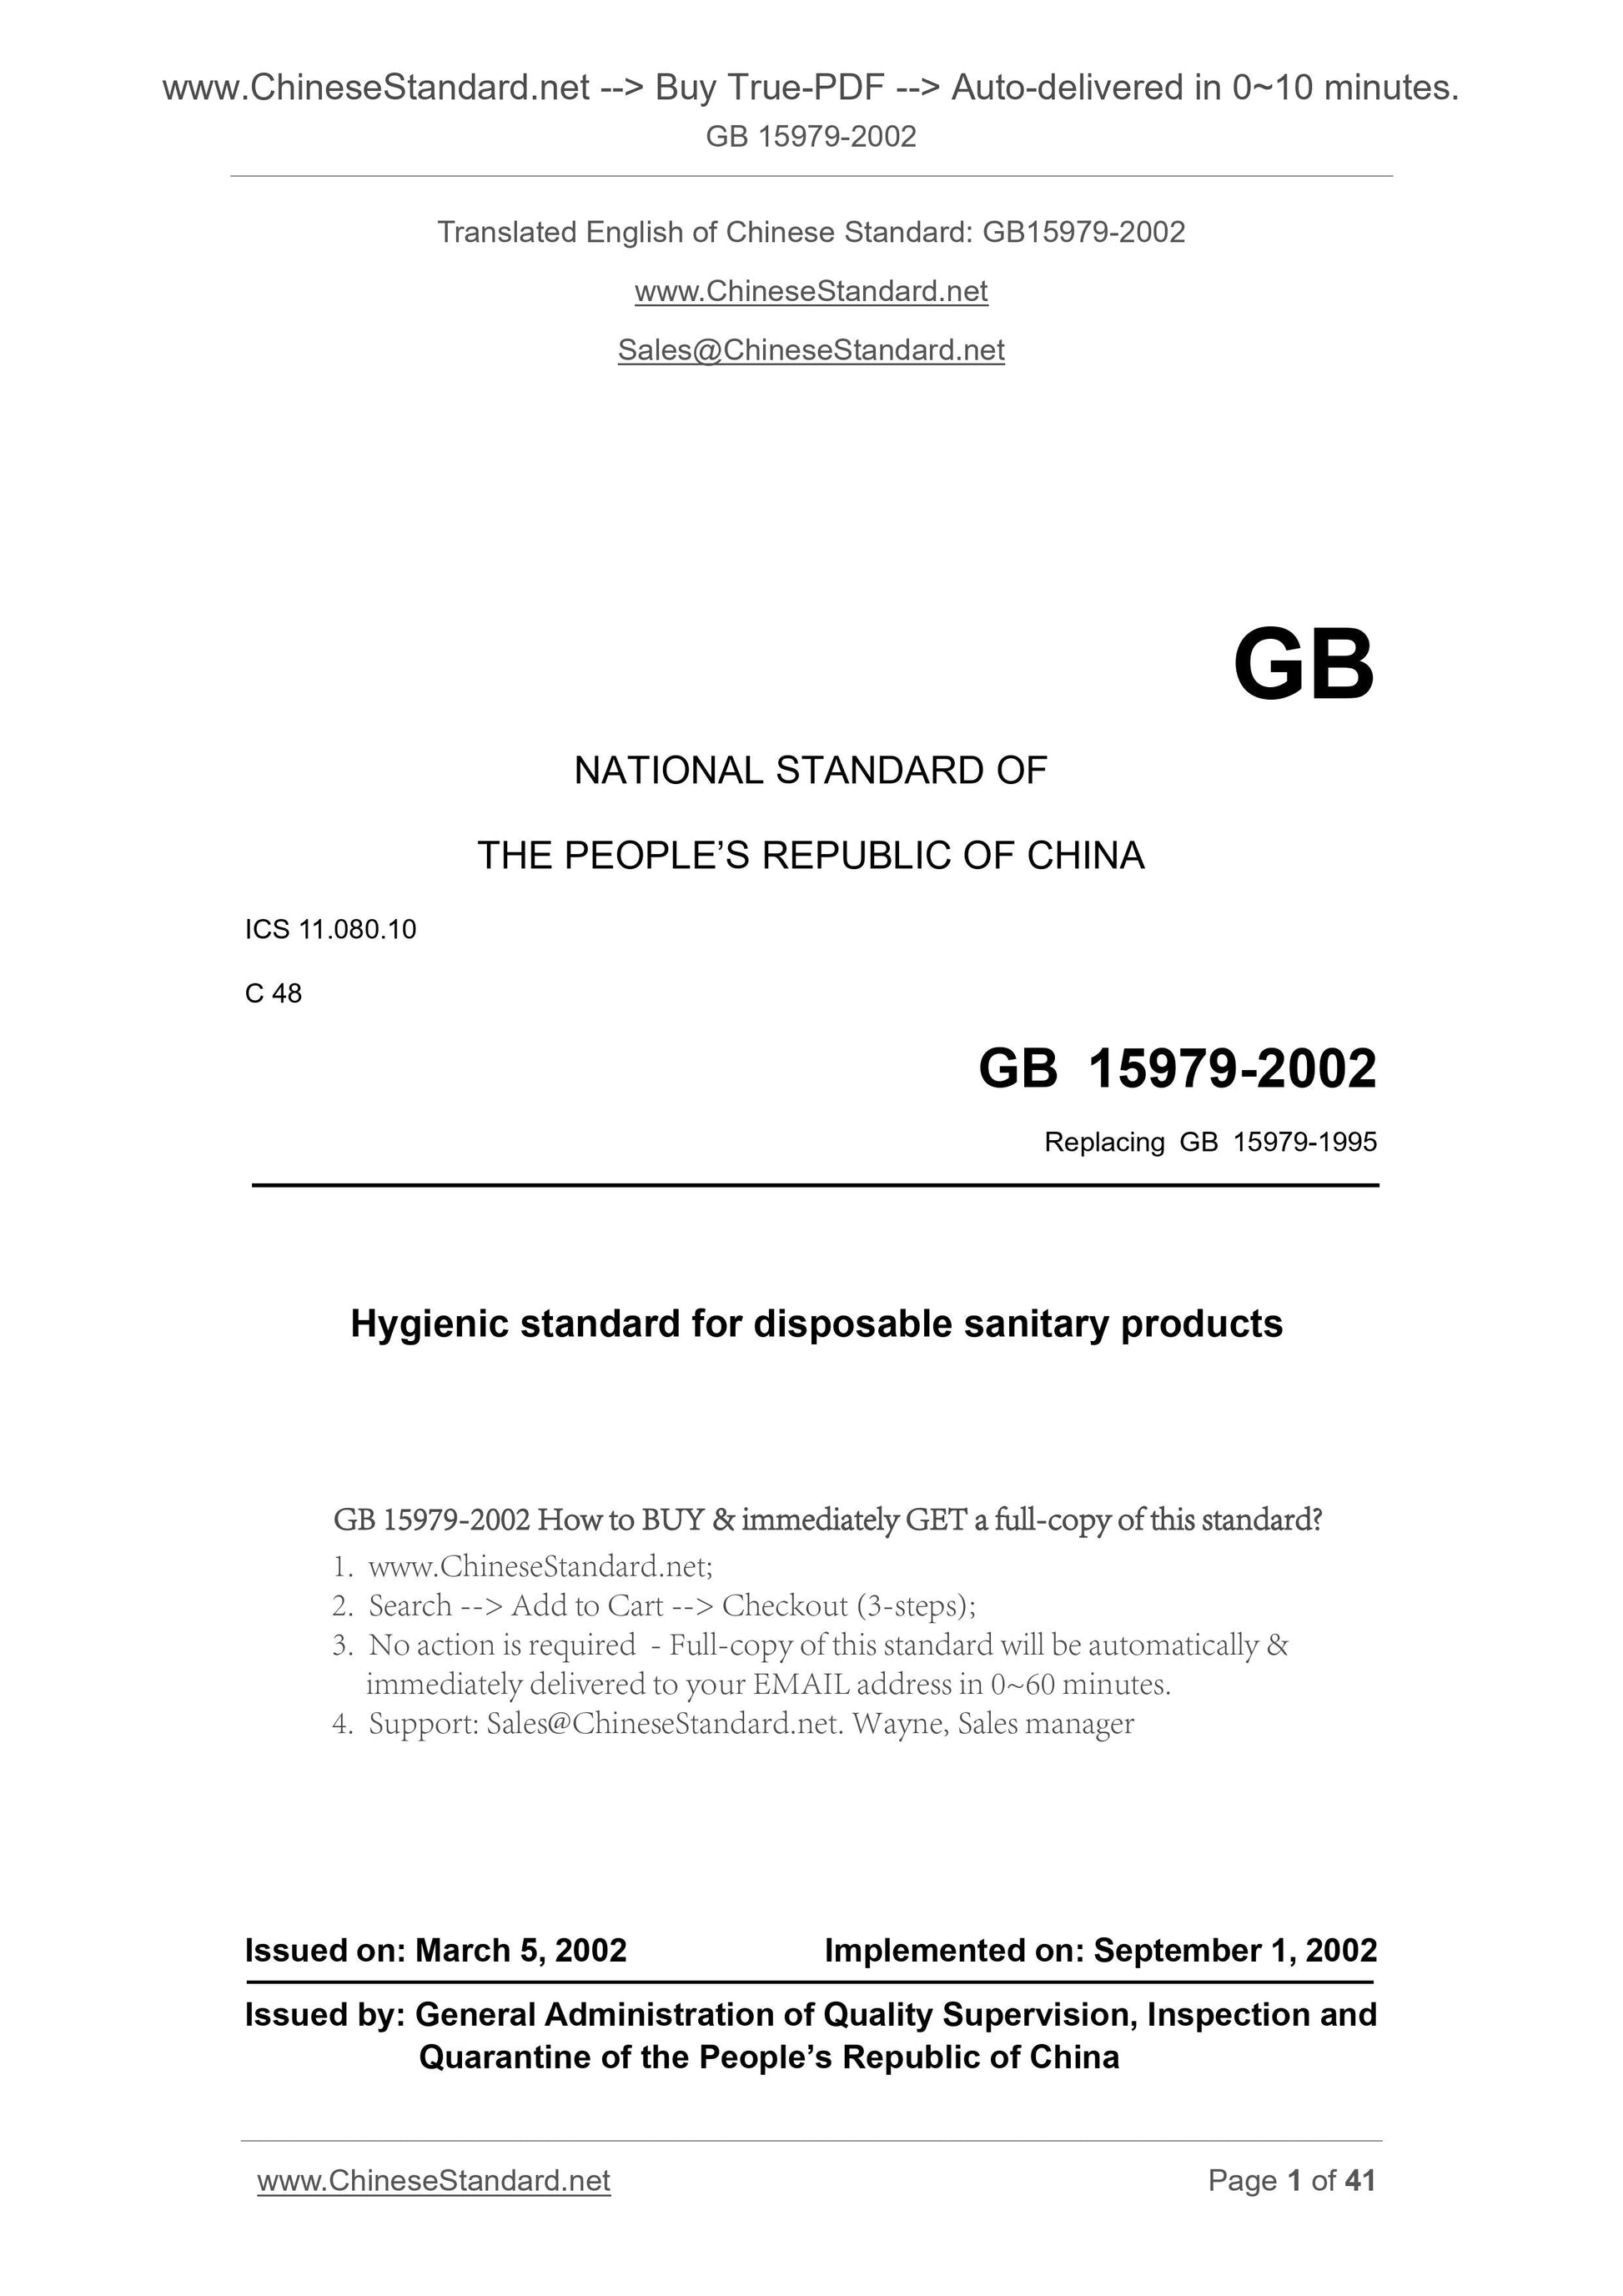 GB 15979-2002 Page 1